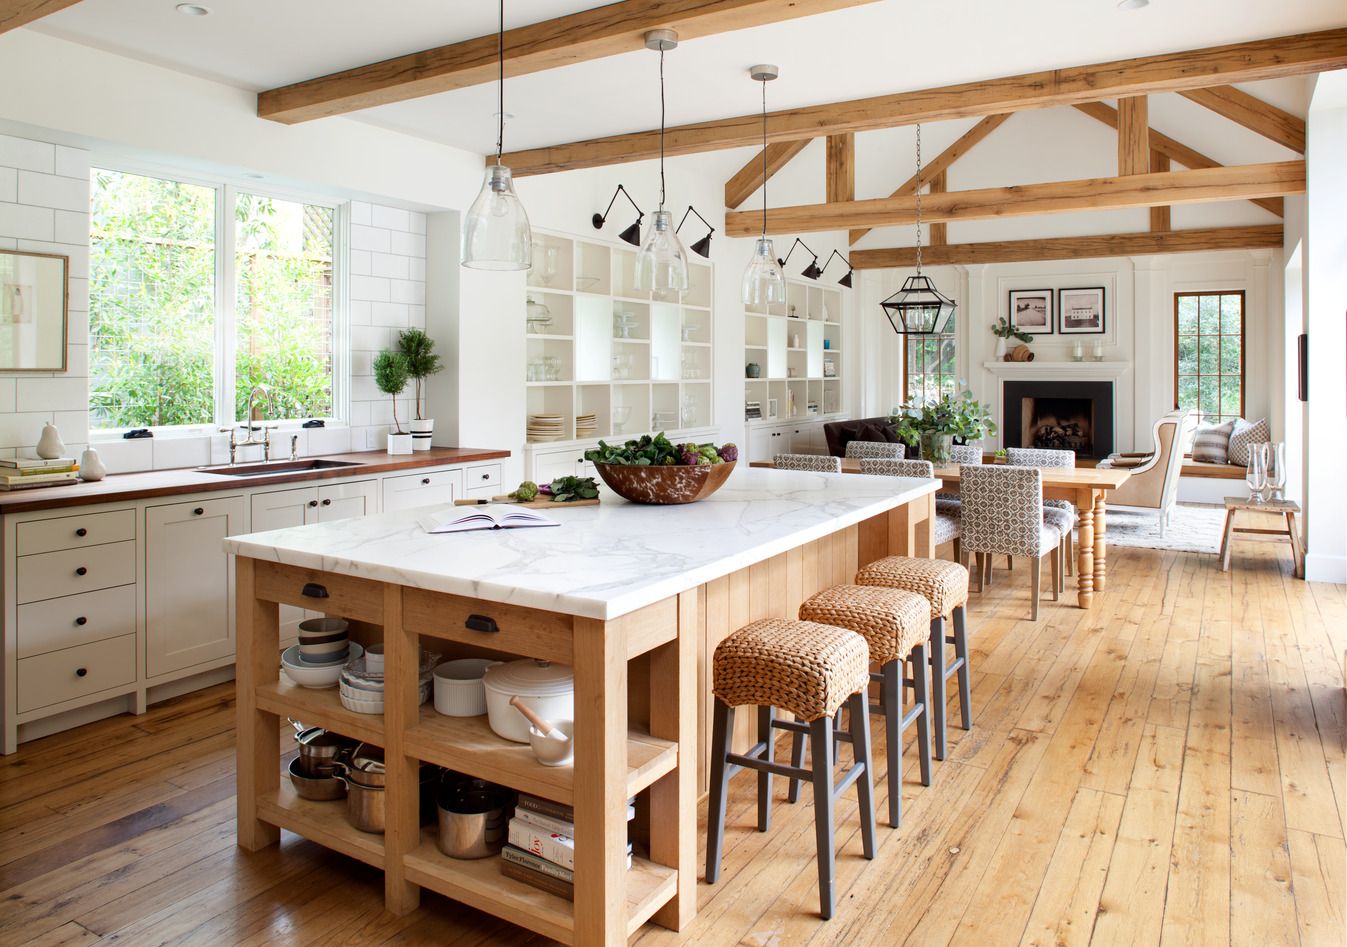 How To Paint An Open Concept Kitchen And Living Room